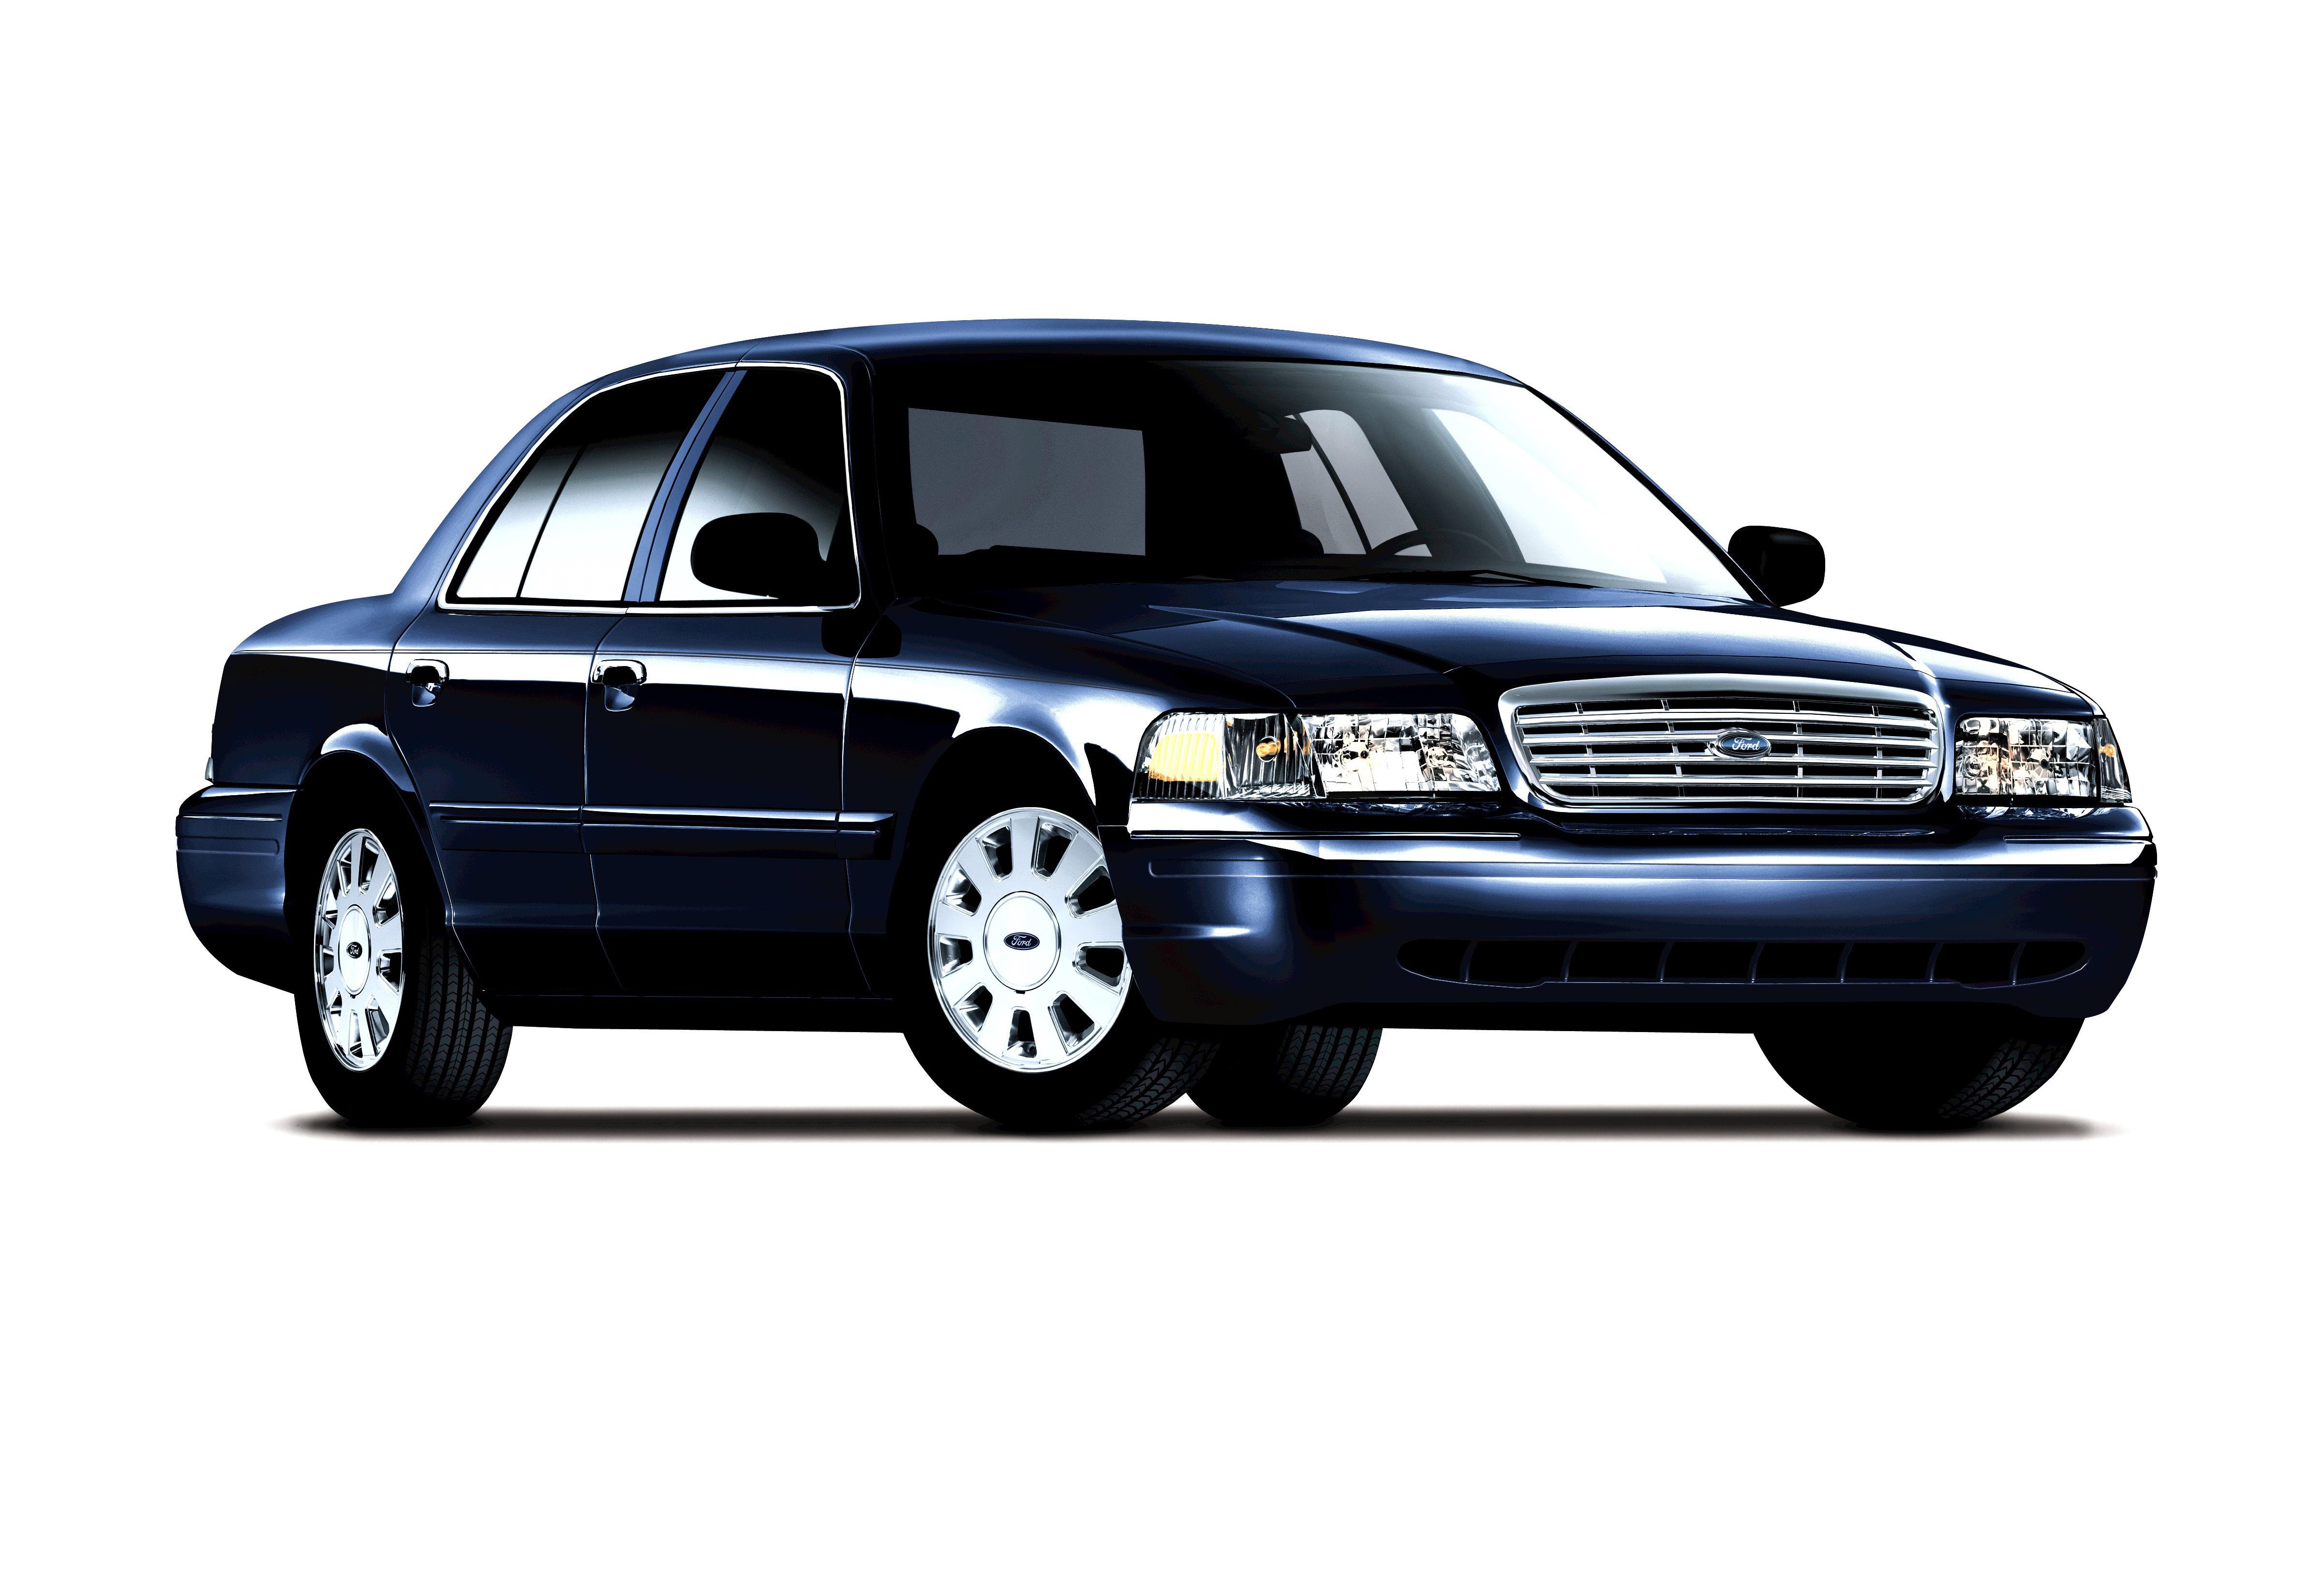 General 4800x3300 USA vehicle Crown Victoria car simple background white background minimalism frontal view American cars Ford